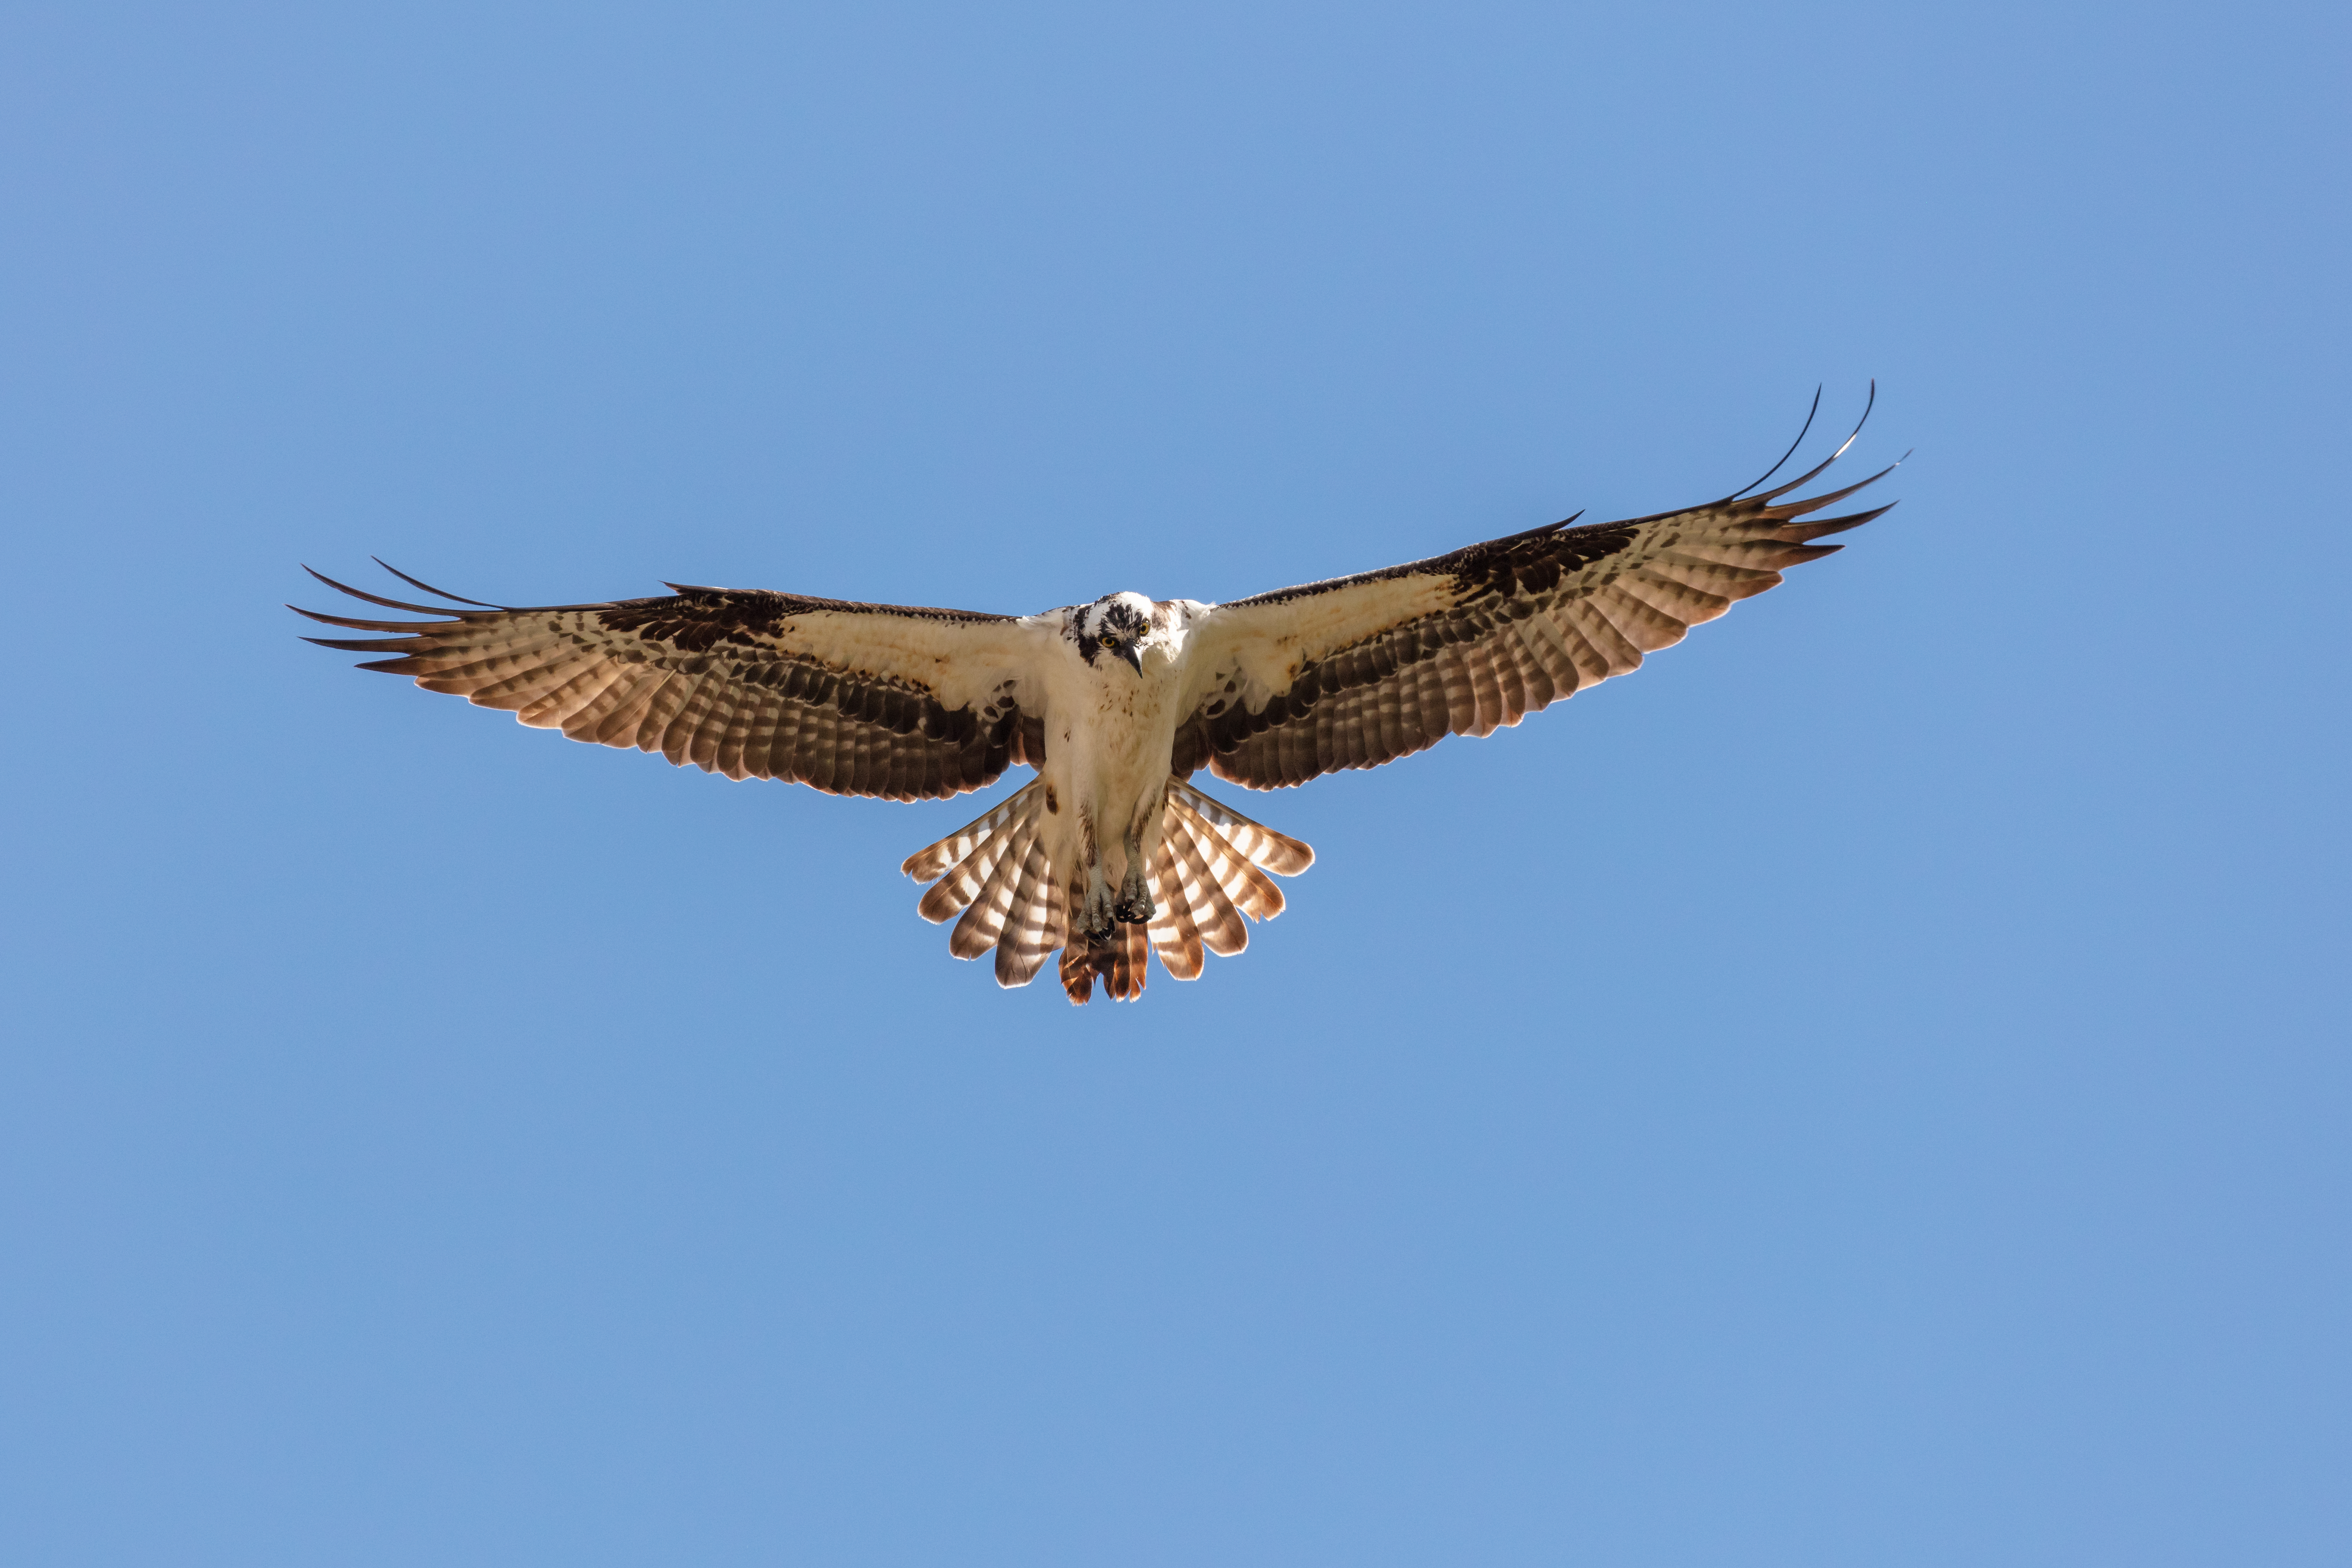 A bird of prey with white breast and black and brown patterned wings in the sky